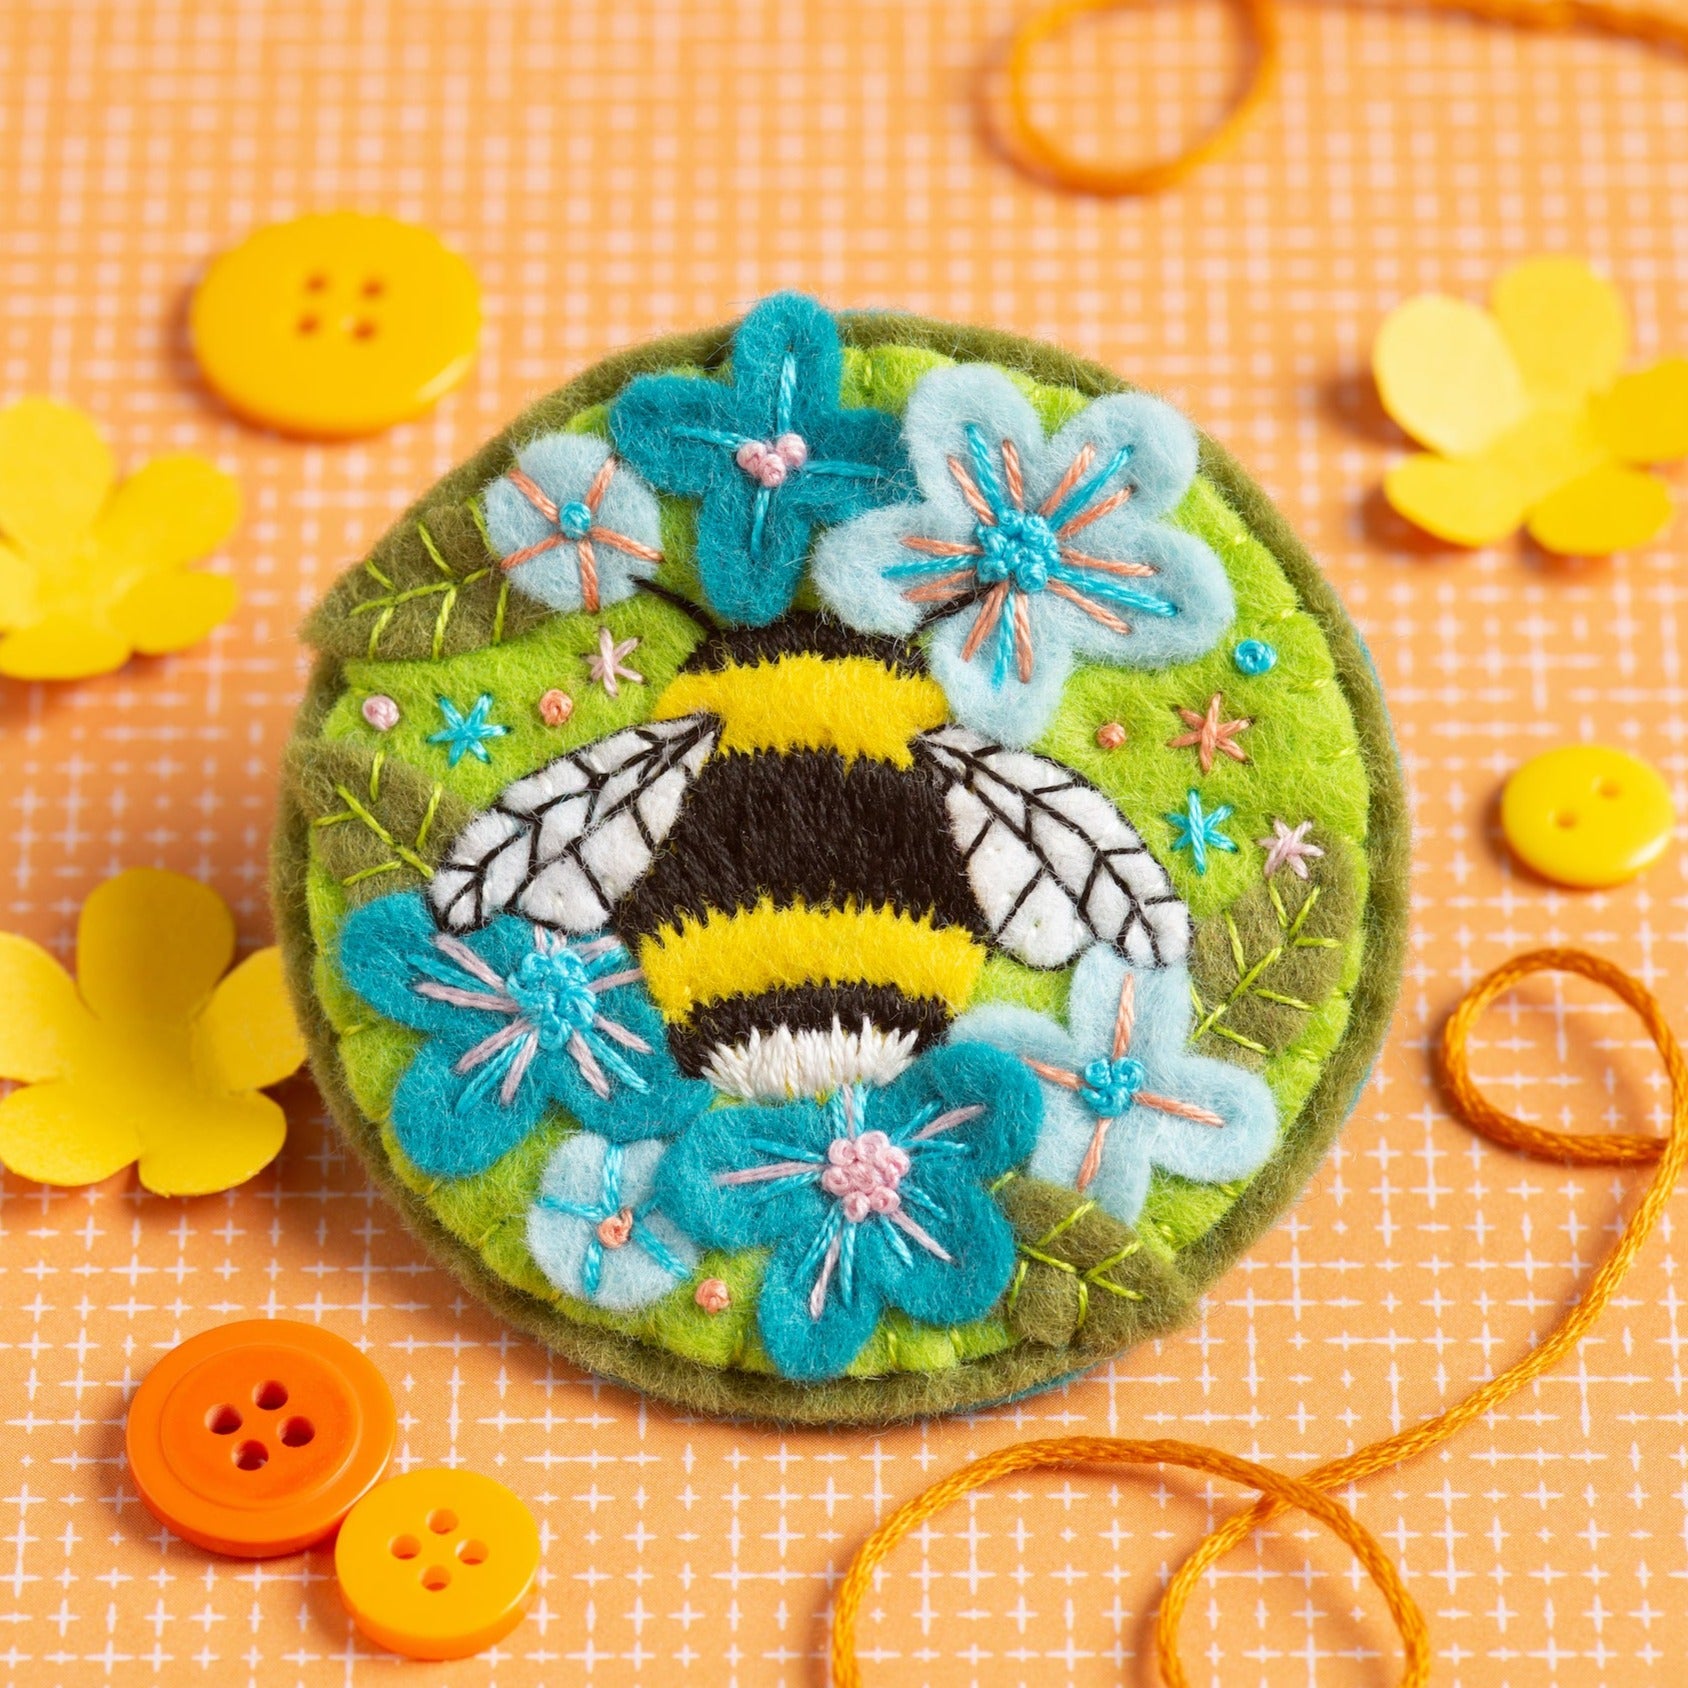 DIY Small Embroidery Hoop Bumble Bee - The Crafty Decorator